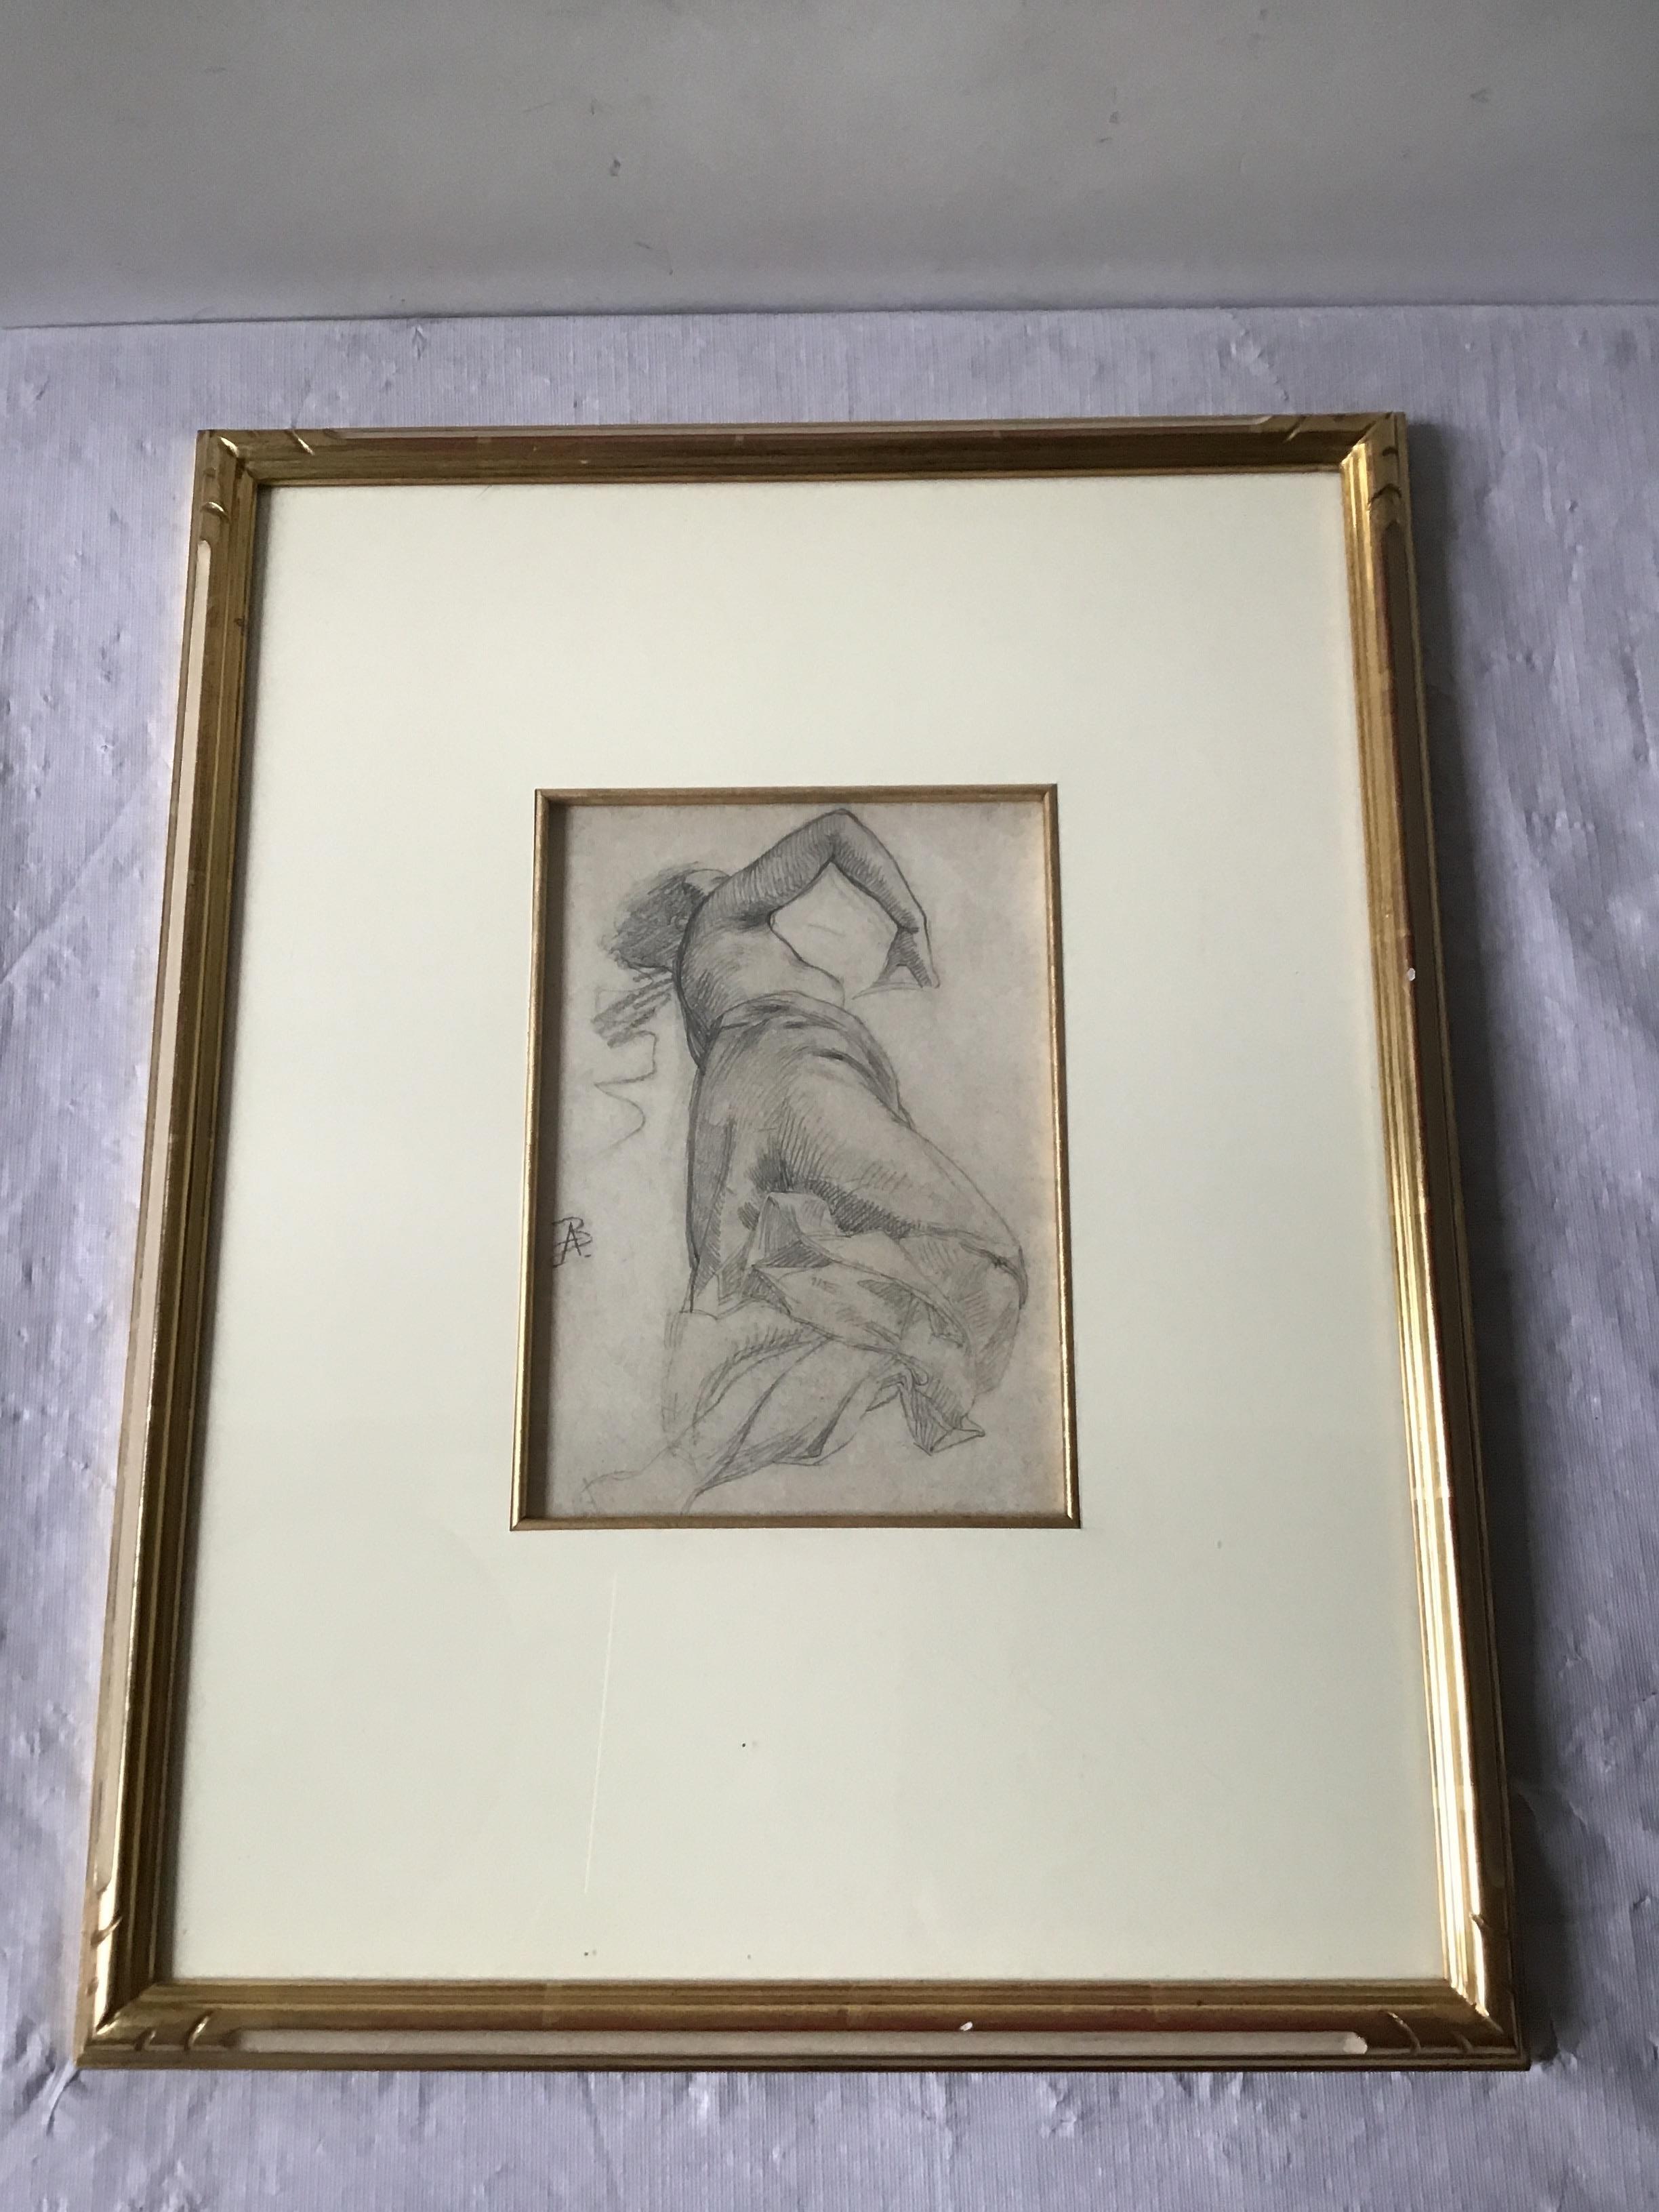 1880s Paul Albert Besnard pencil drawing of a woman. In a gold gilt frame. From a celebrity’s Southampton, NY oceanfront estate.